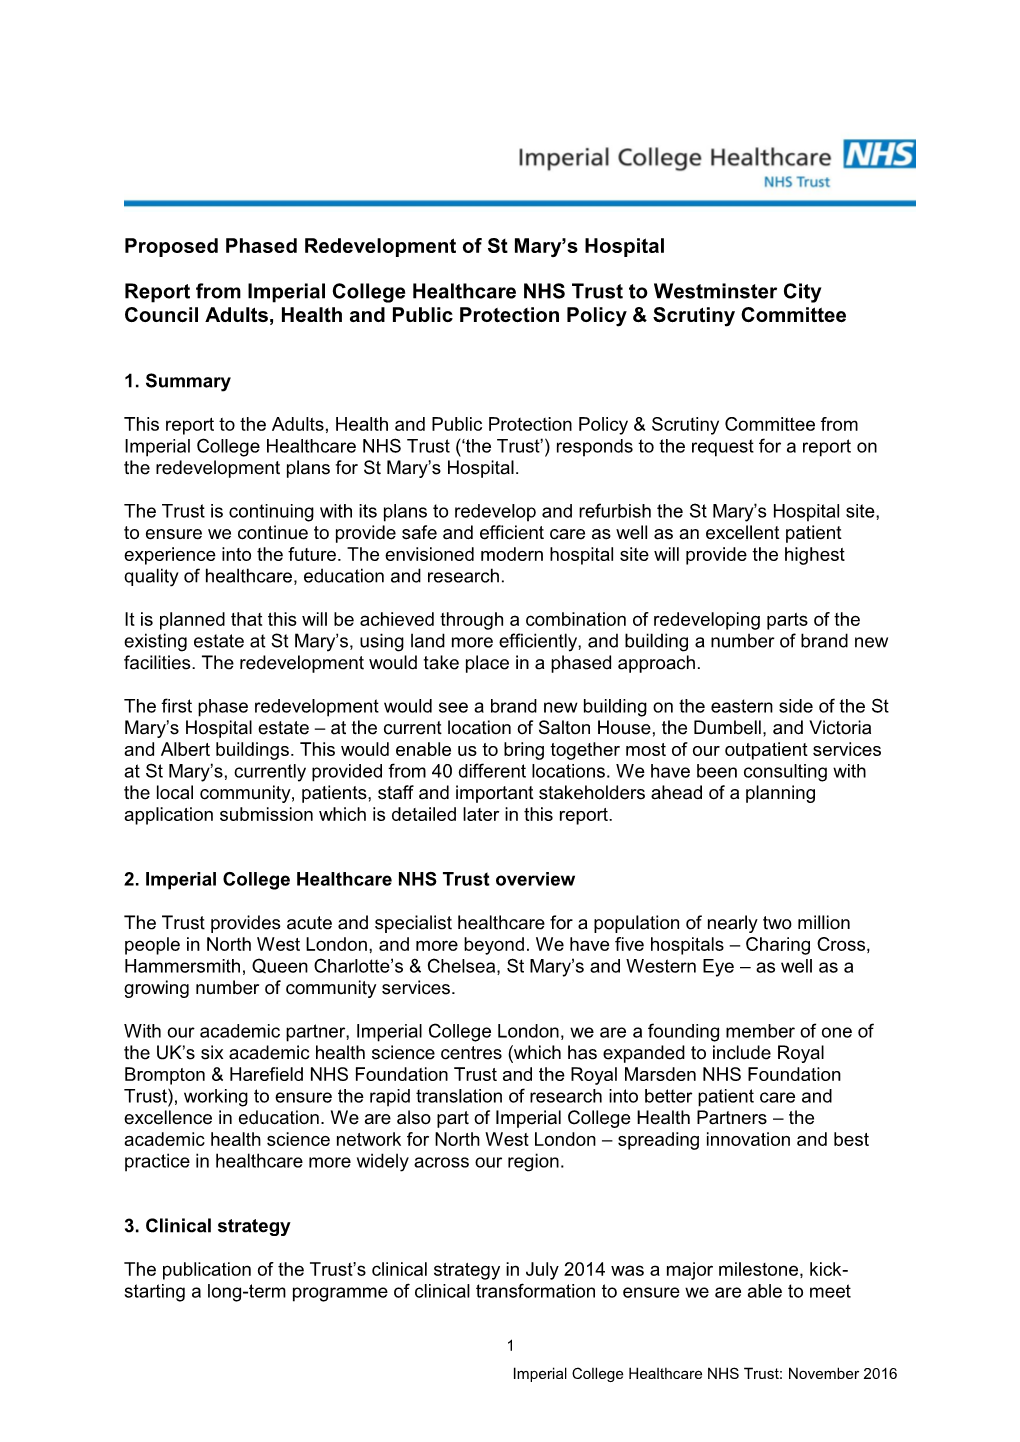 Proposed Phased Redevelopment of St Mary's Hospital Report from Imperial College Healthcare NHS Trust to Westminster City Coun